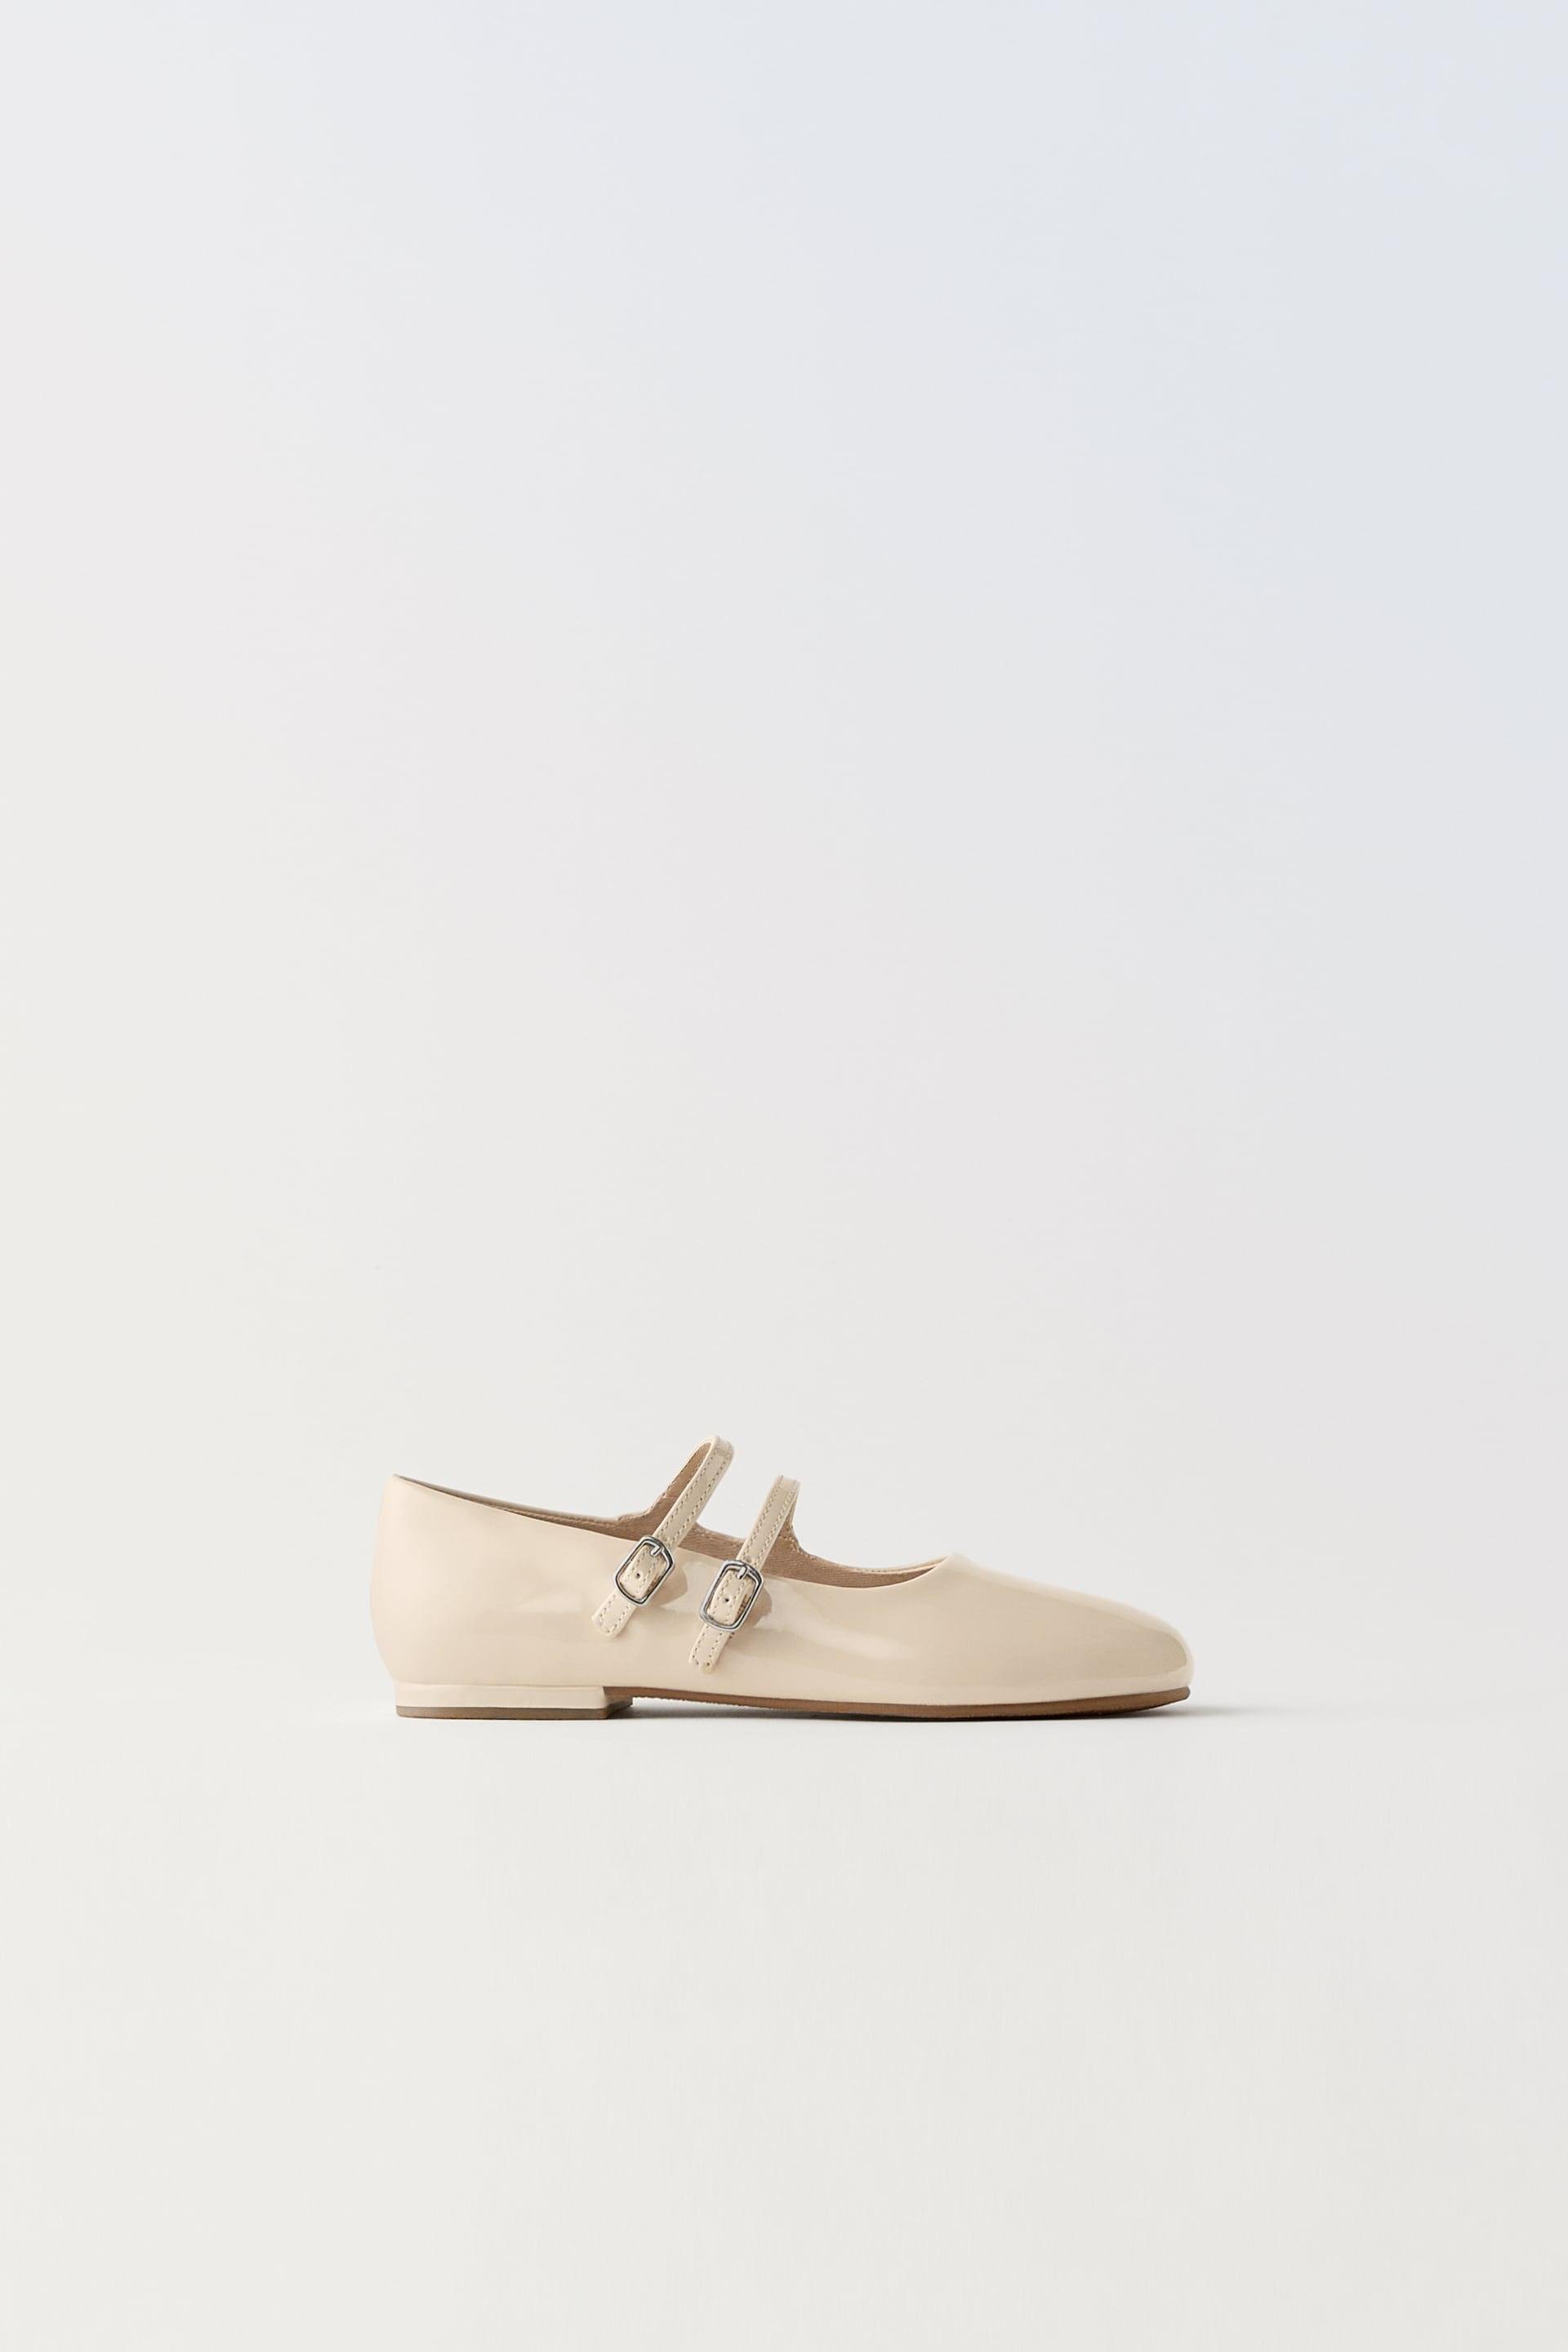 FAUX PATENT LEATHER BALLET FLATS by ZARA